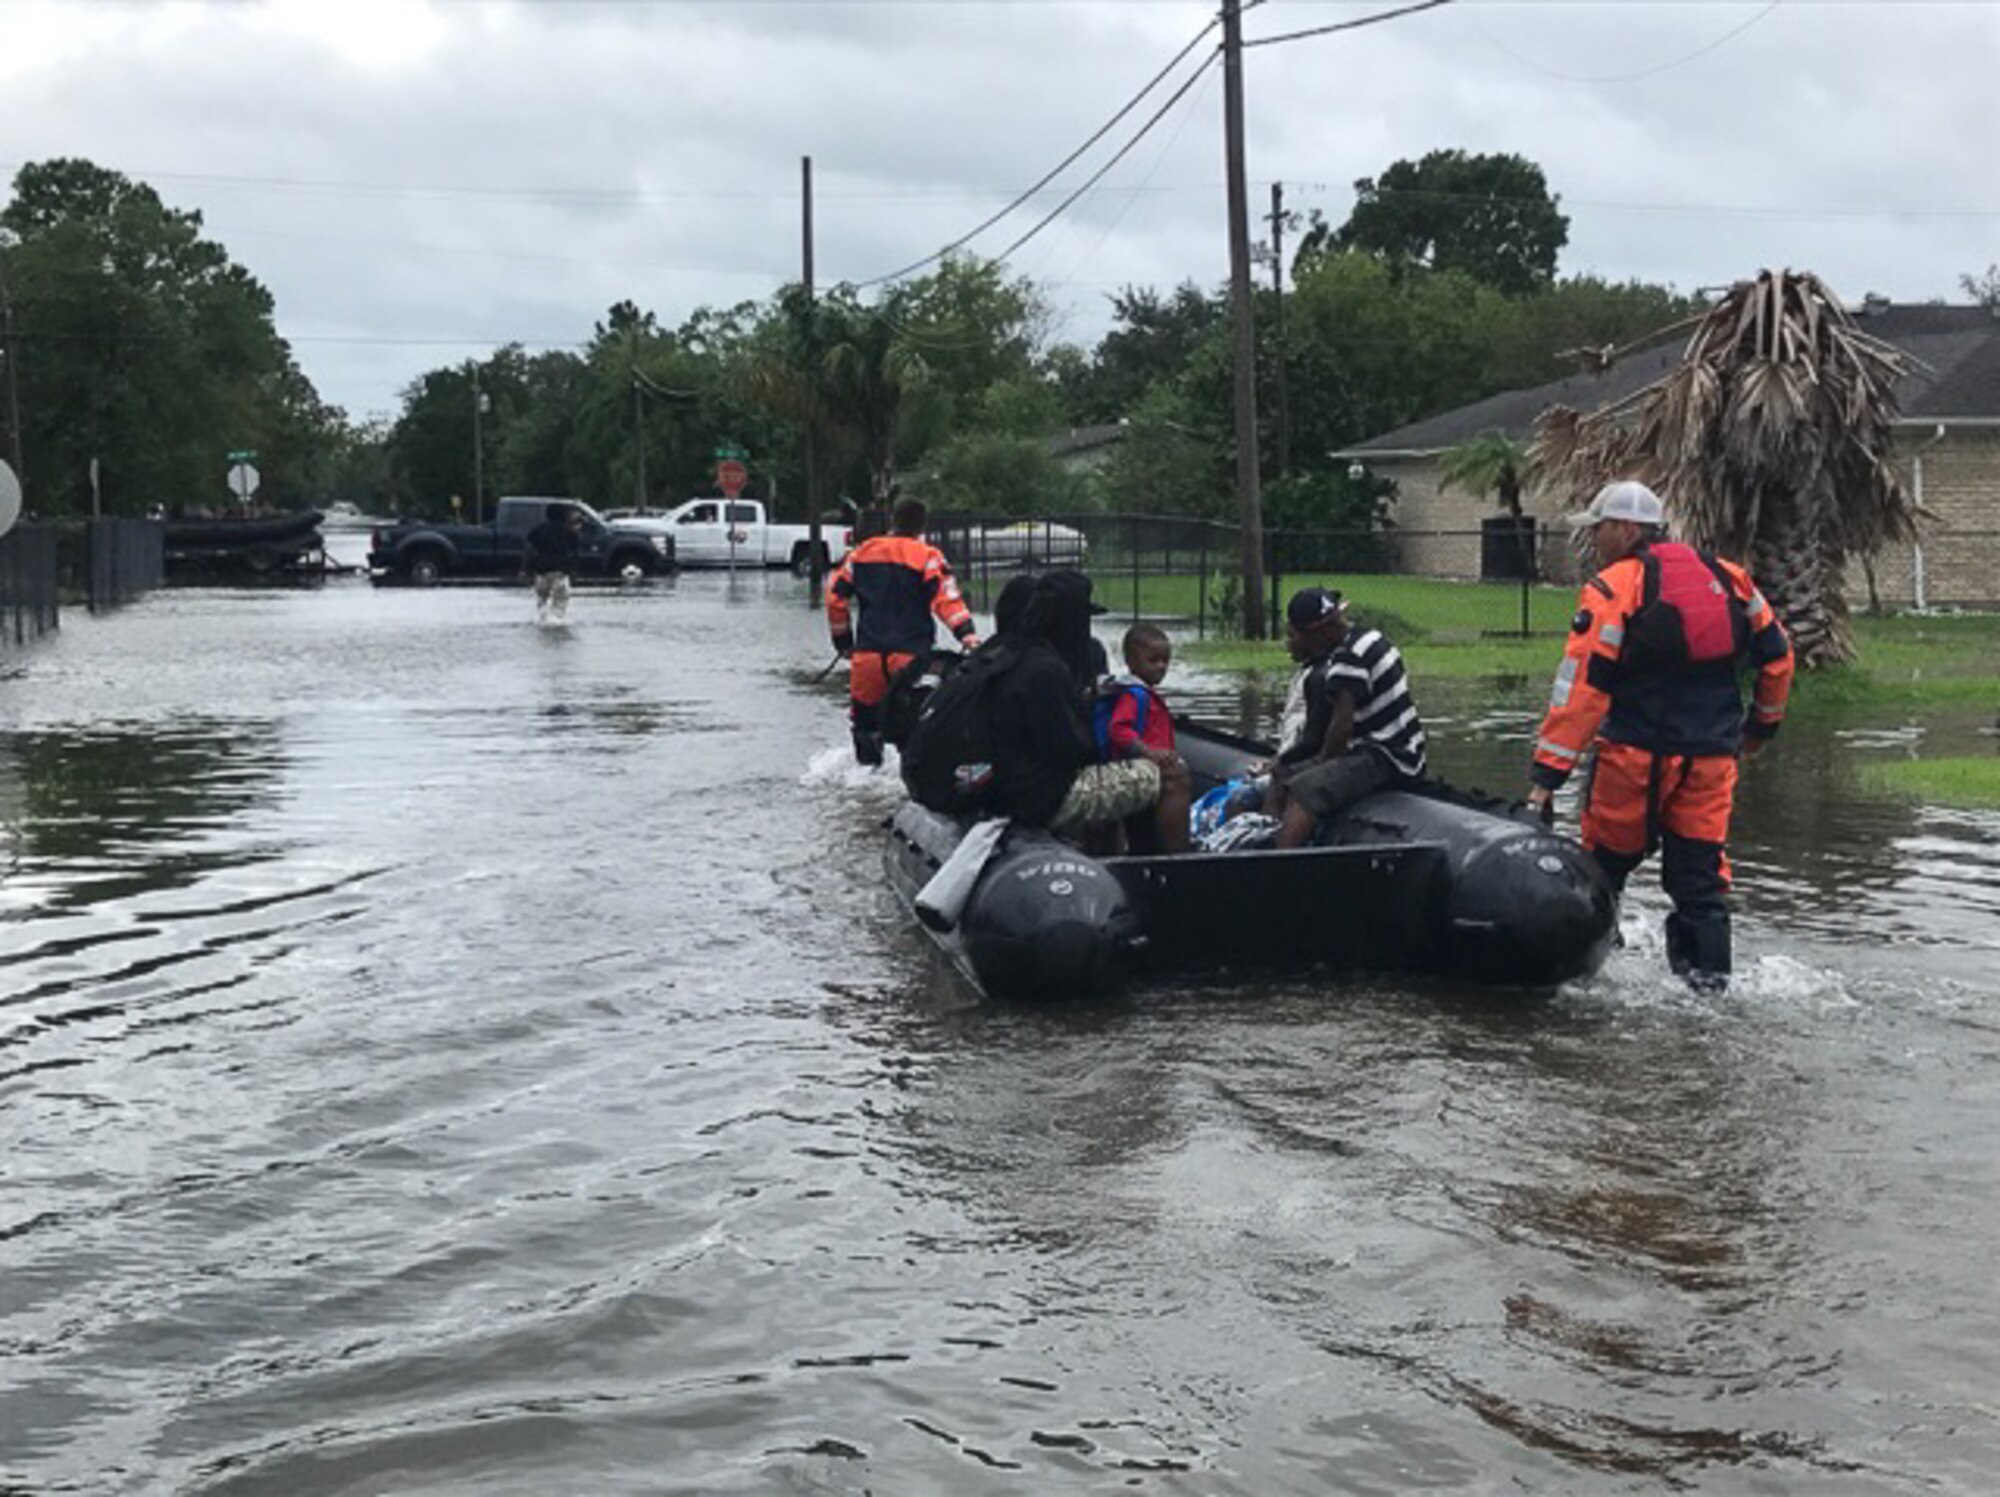 The 123rd STS conducts rescue and recovery operations during Hurricane Harvey.